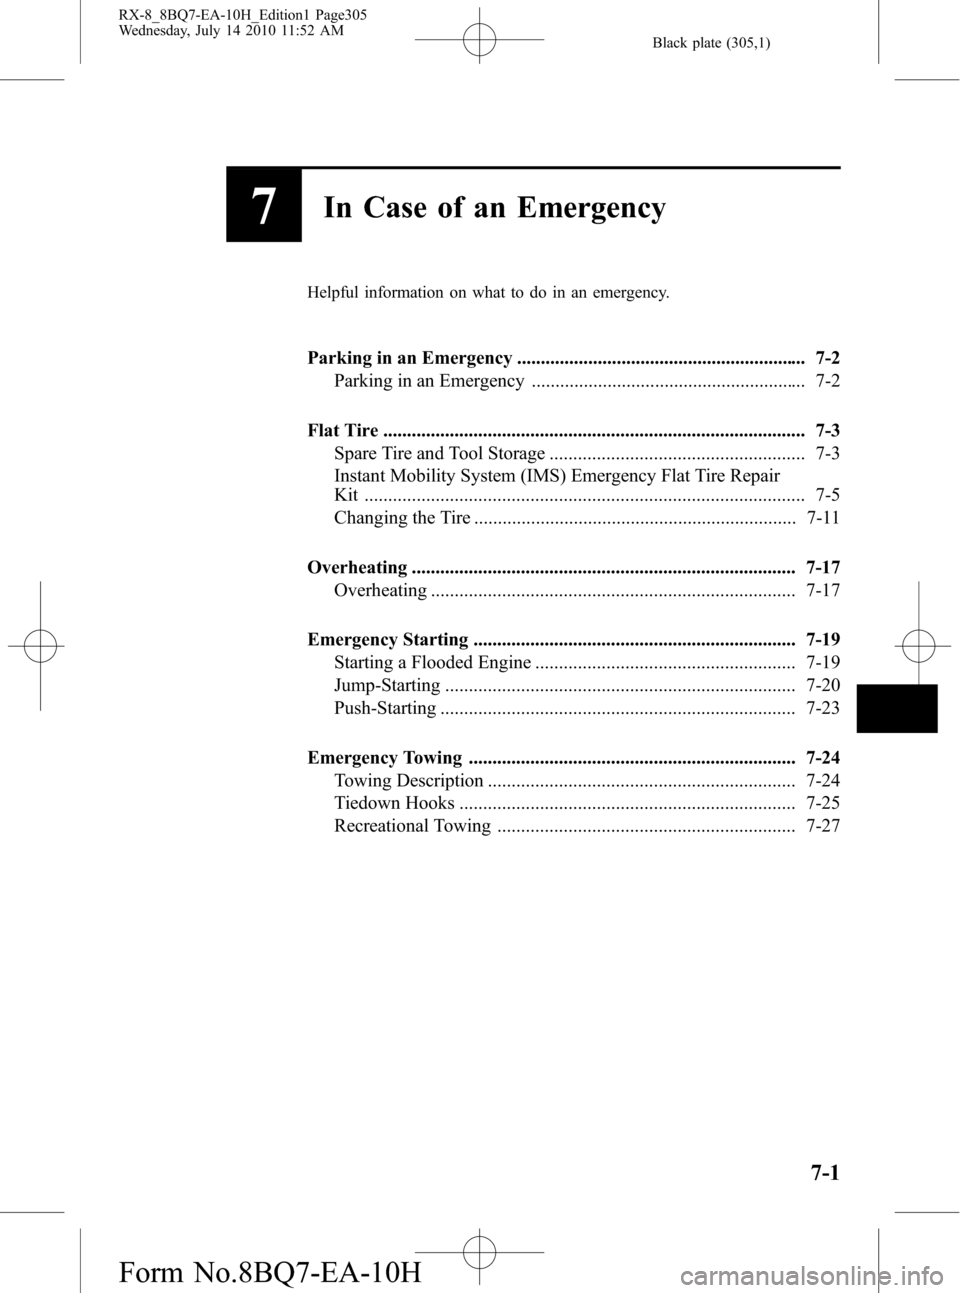 MAZDA MODEL RX 8 2011  Owners Manual (in English) Black plate (305,1)
7In Case of an Emergency
Helpful information on what to do in an emergency.
Parking in an Emergency ............................................................. 7-2
Parking in an 